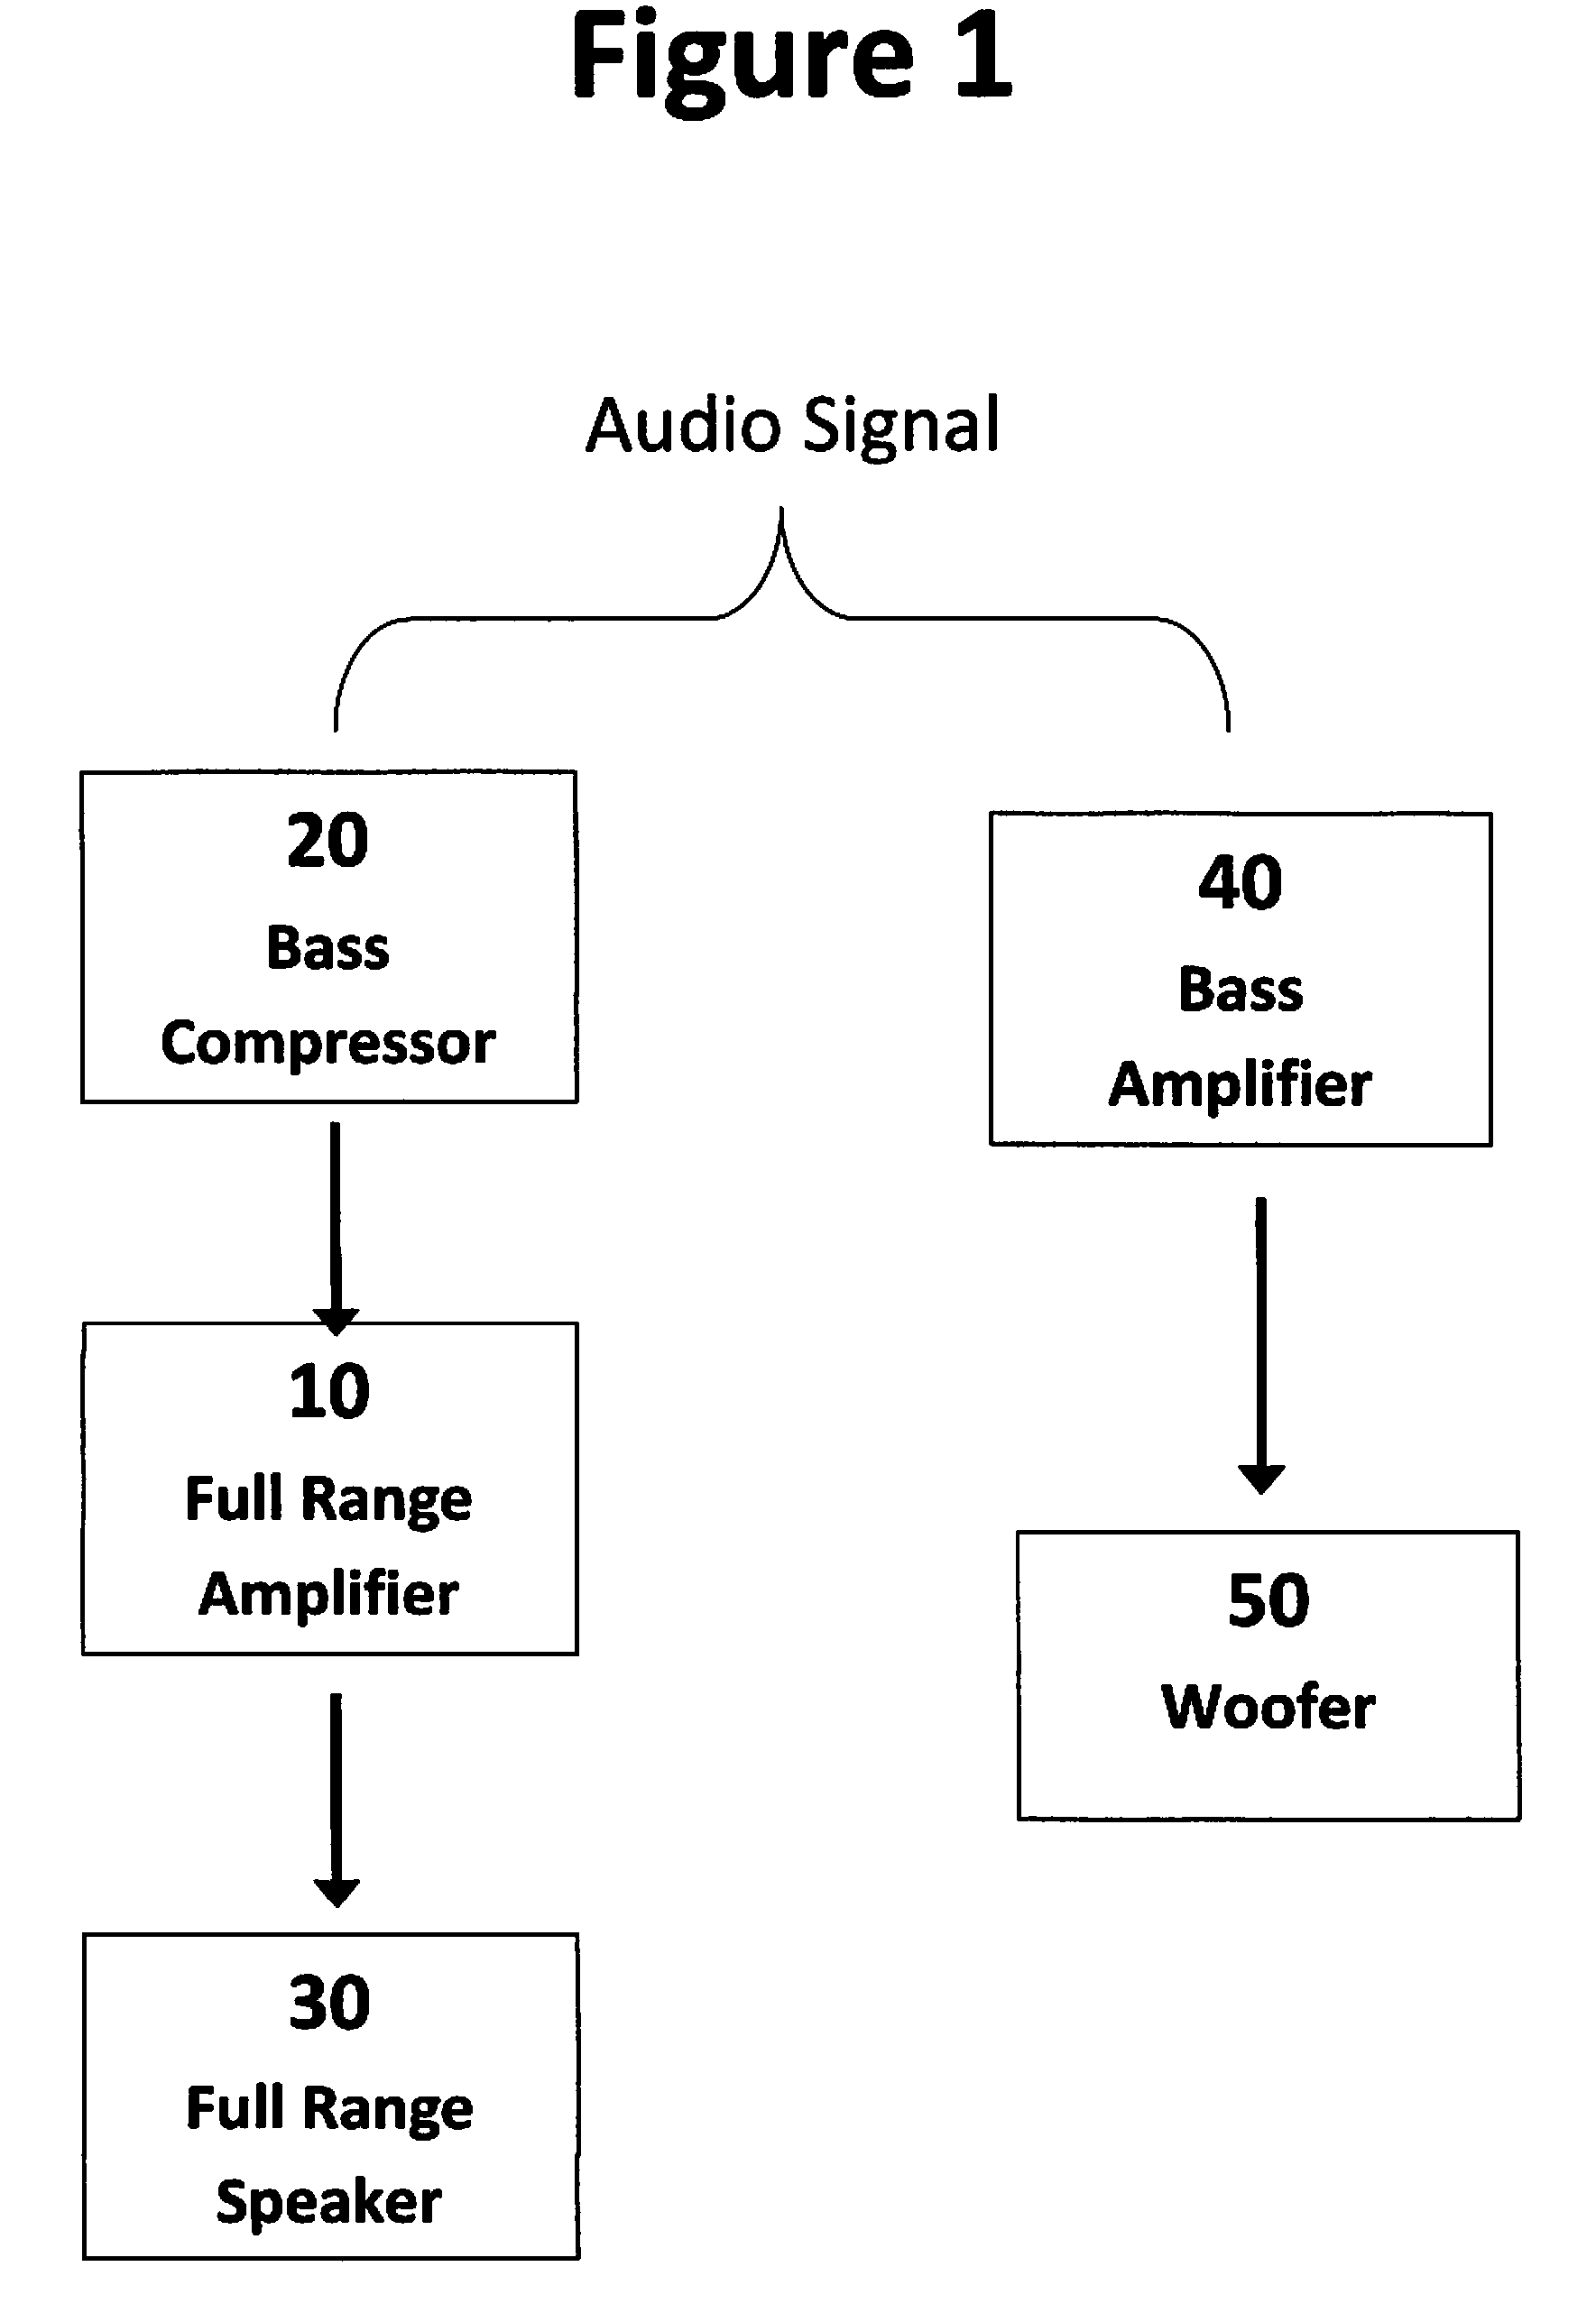 Acoustic speaker system with strong bass capability